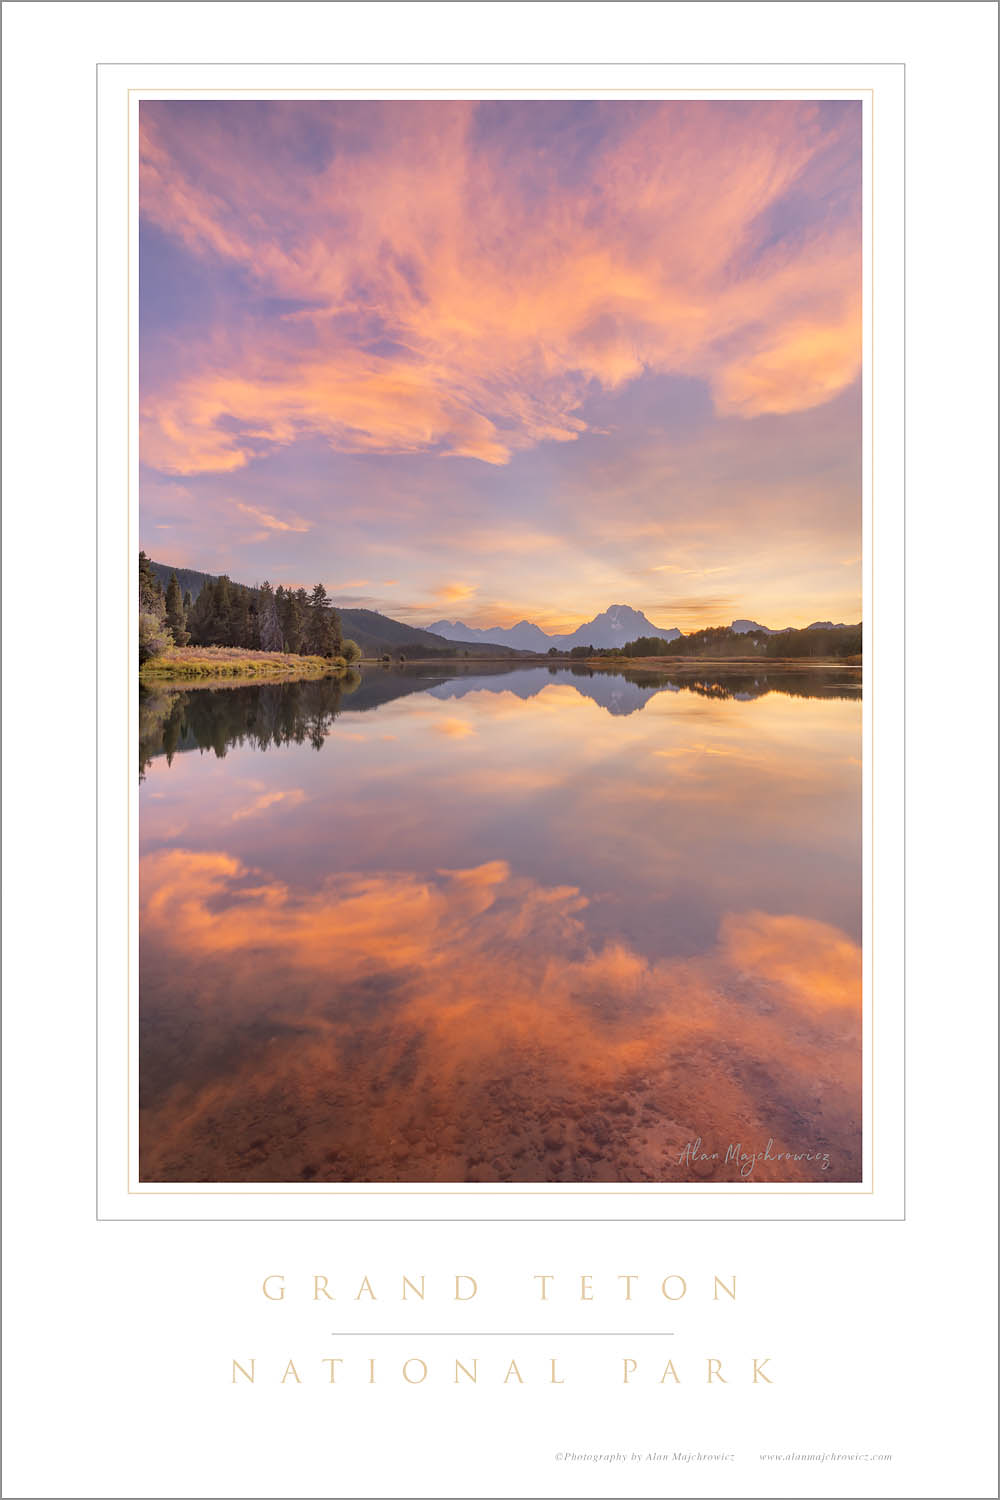 Clouds glowing red and orange in the light of the setting sun reflected in still waters of the Snake River at Oxbow Bend, Grand Teton National Park Wyoming